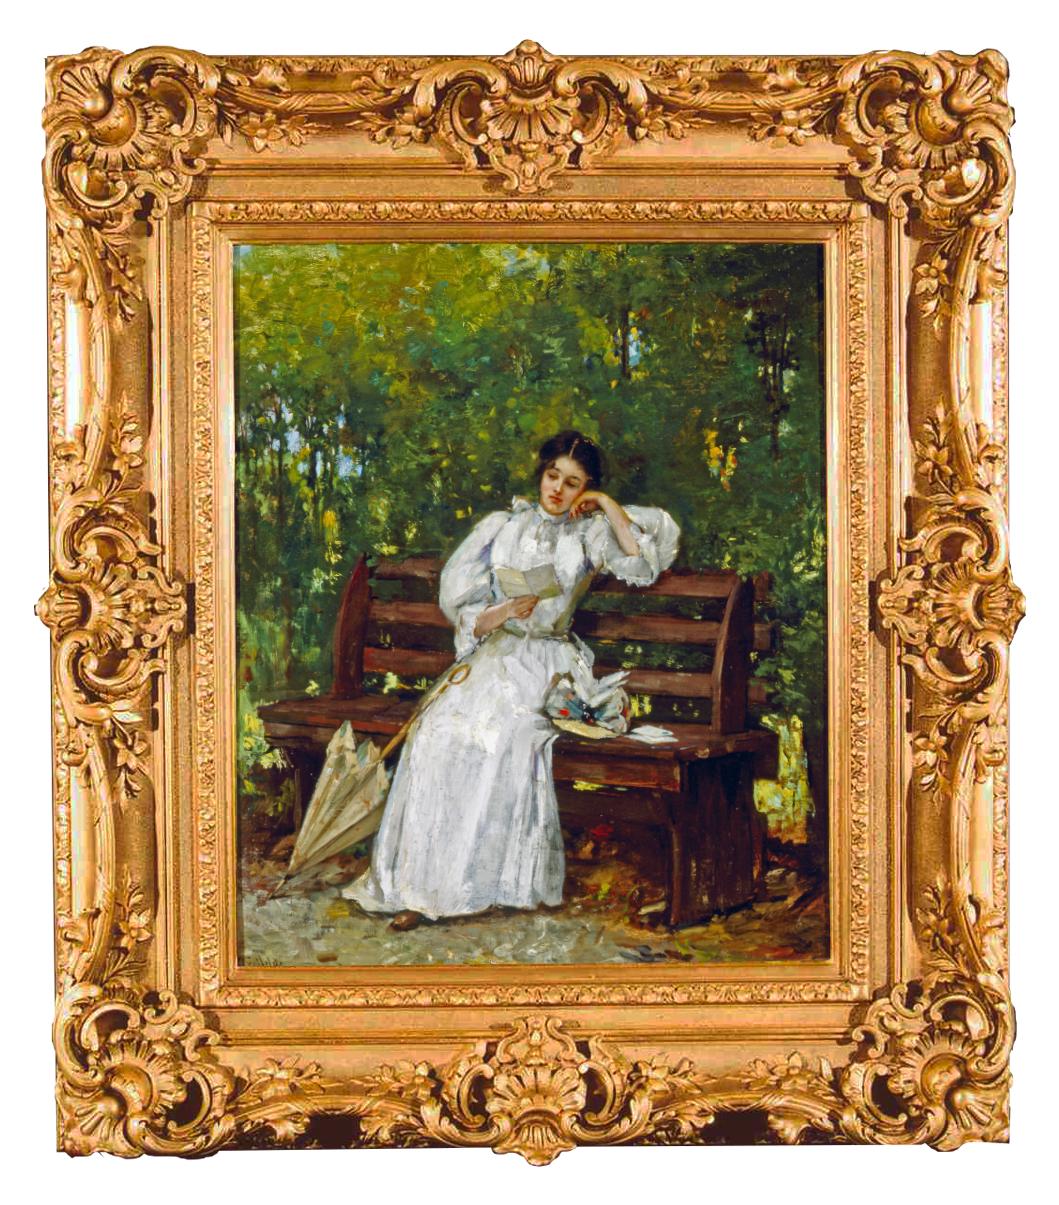 Richard Creifelds Portrait Painting - 19th Century portrait of a Woman titles "A Quiet Afternoon in the Park"